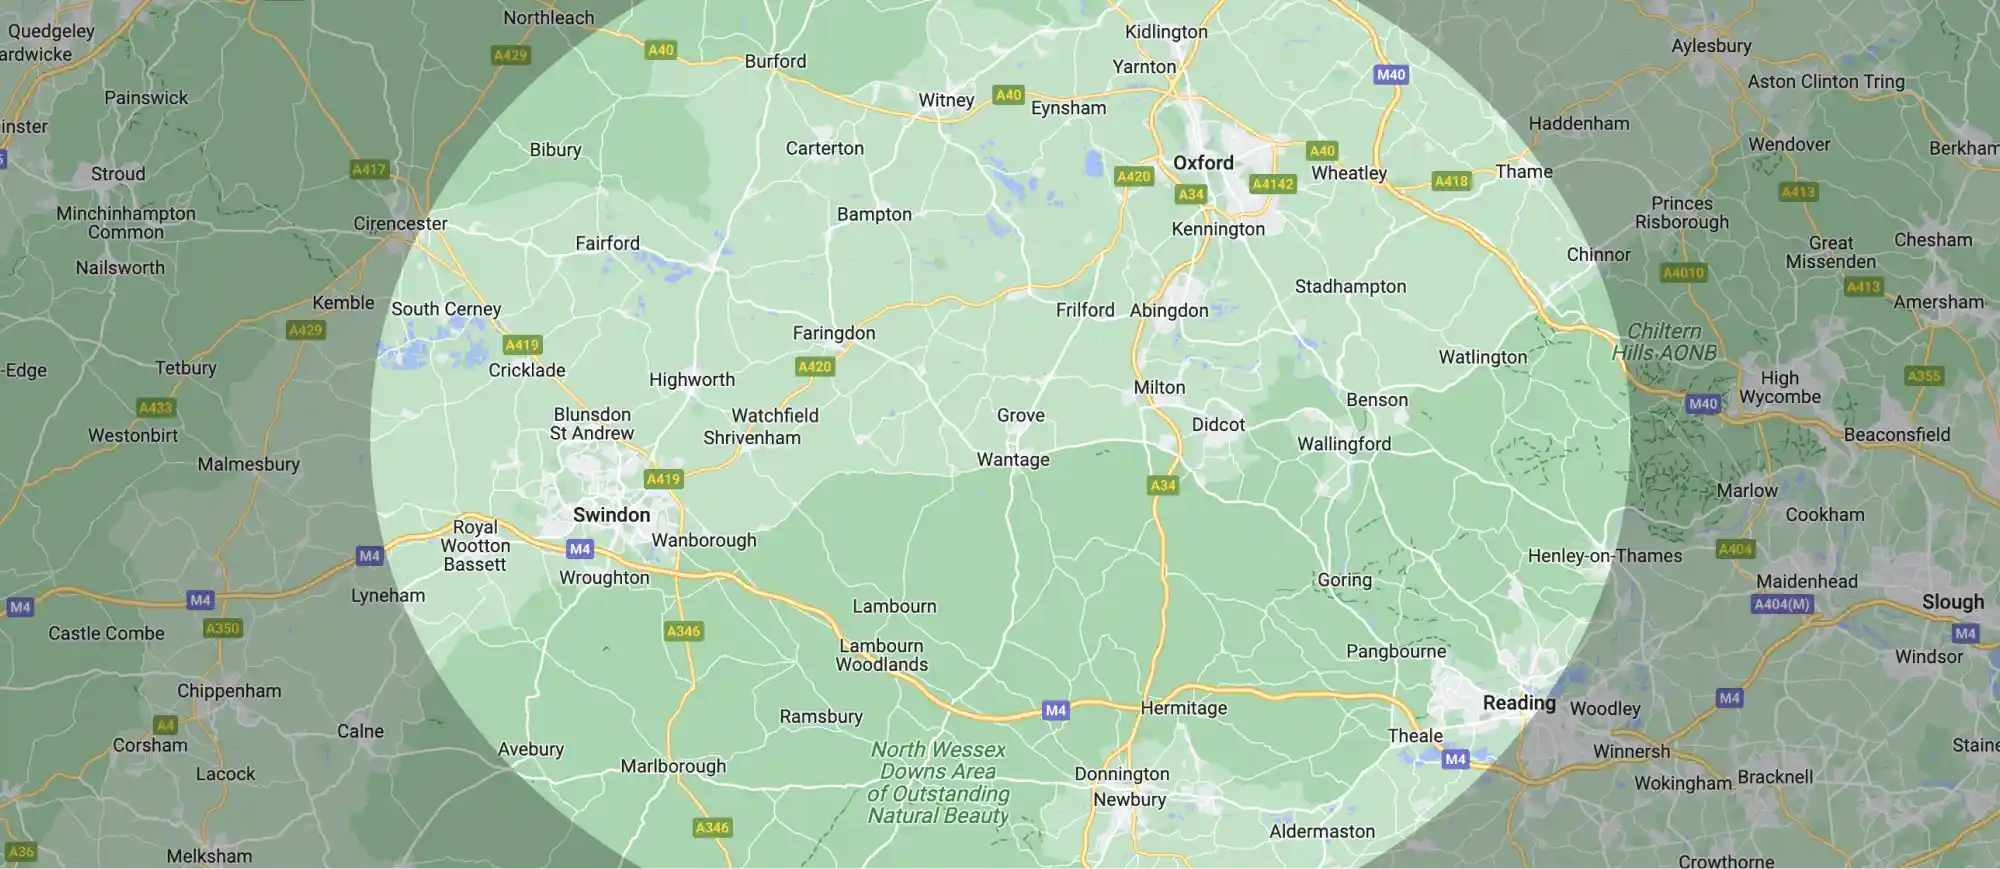 A map showing the area in which G&M Building Contractors provides their building services and natural stone work services. The areas include Oxford, Wantage, Swindon, Oxfordshire and Berkshire.